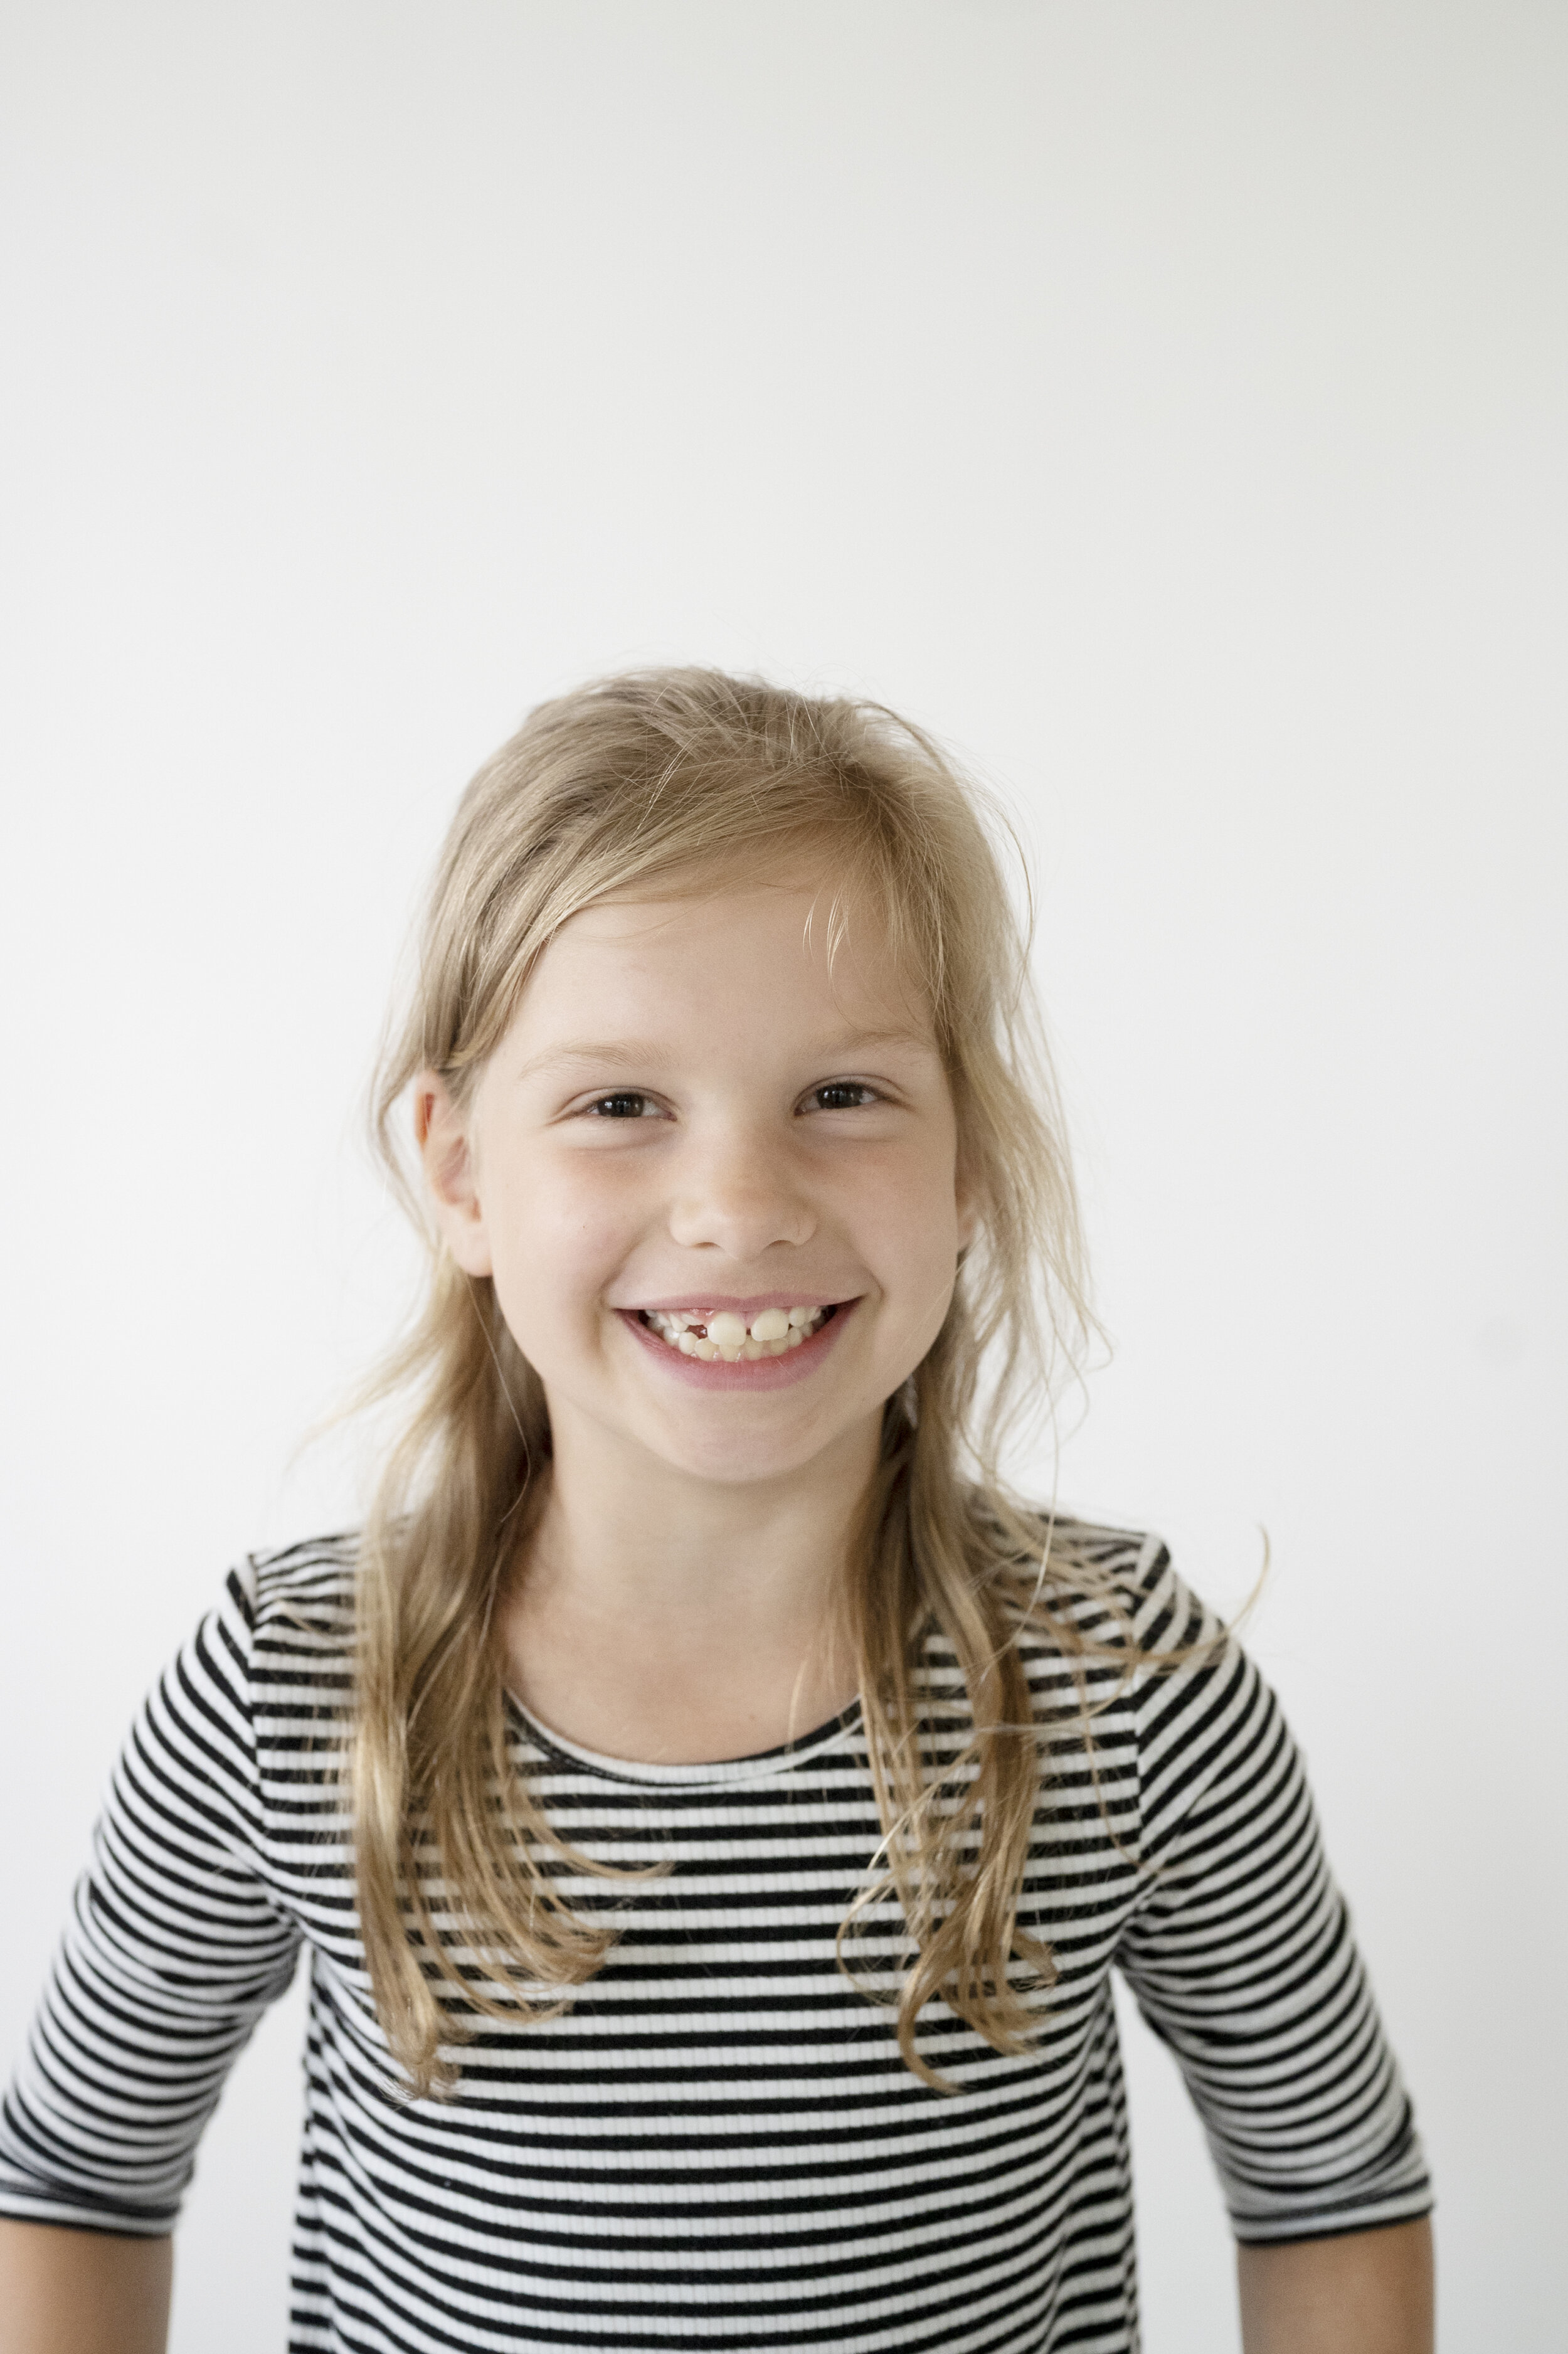 Young girl with reddish brown hair and a striped shirt is smiling directly at the camera.